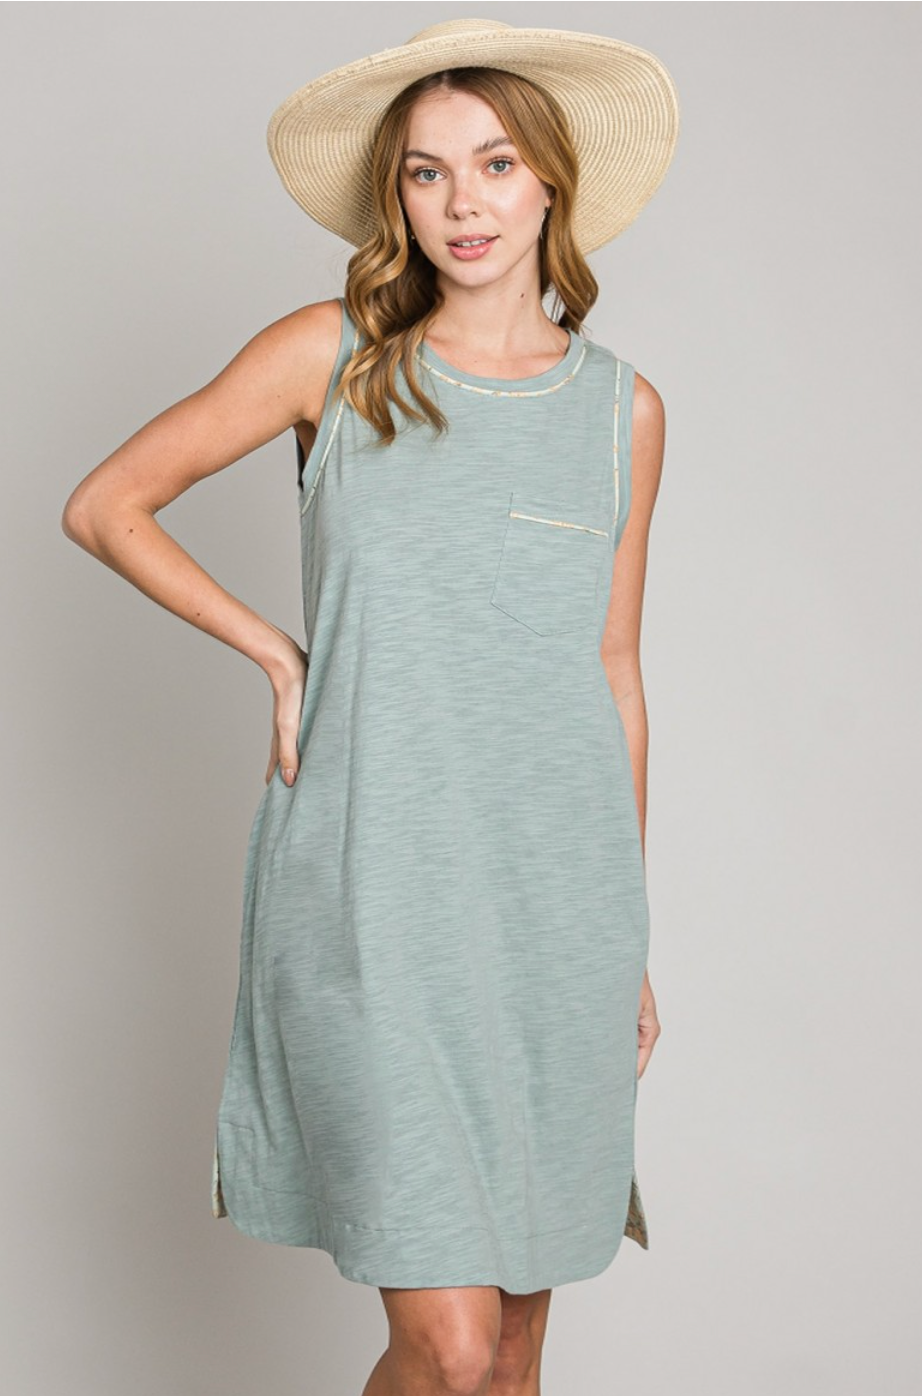 See You Every Time Tank Dress - Mint